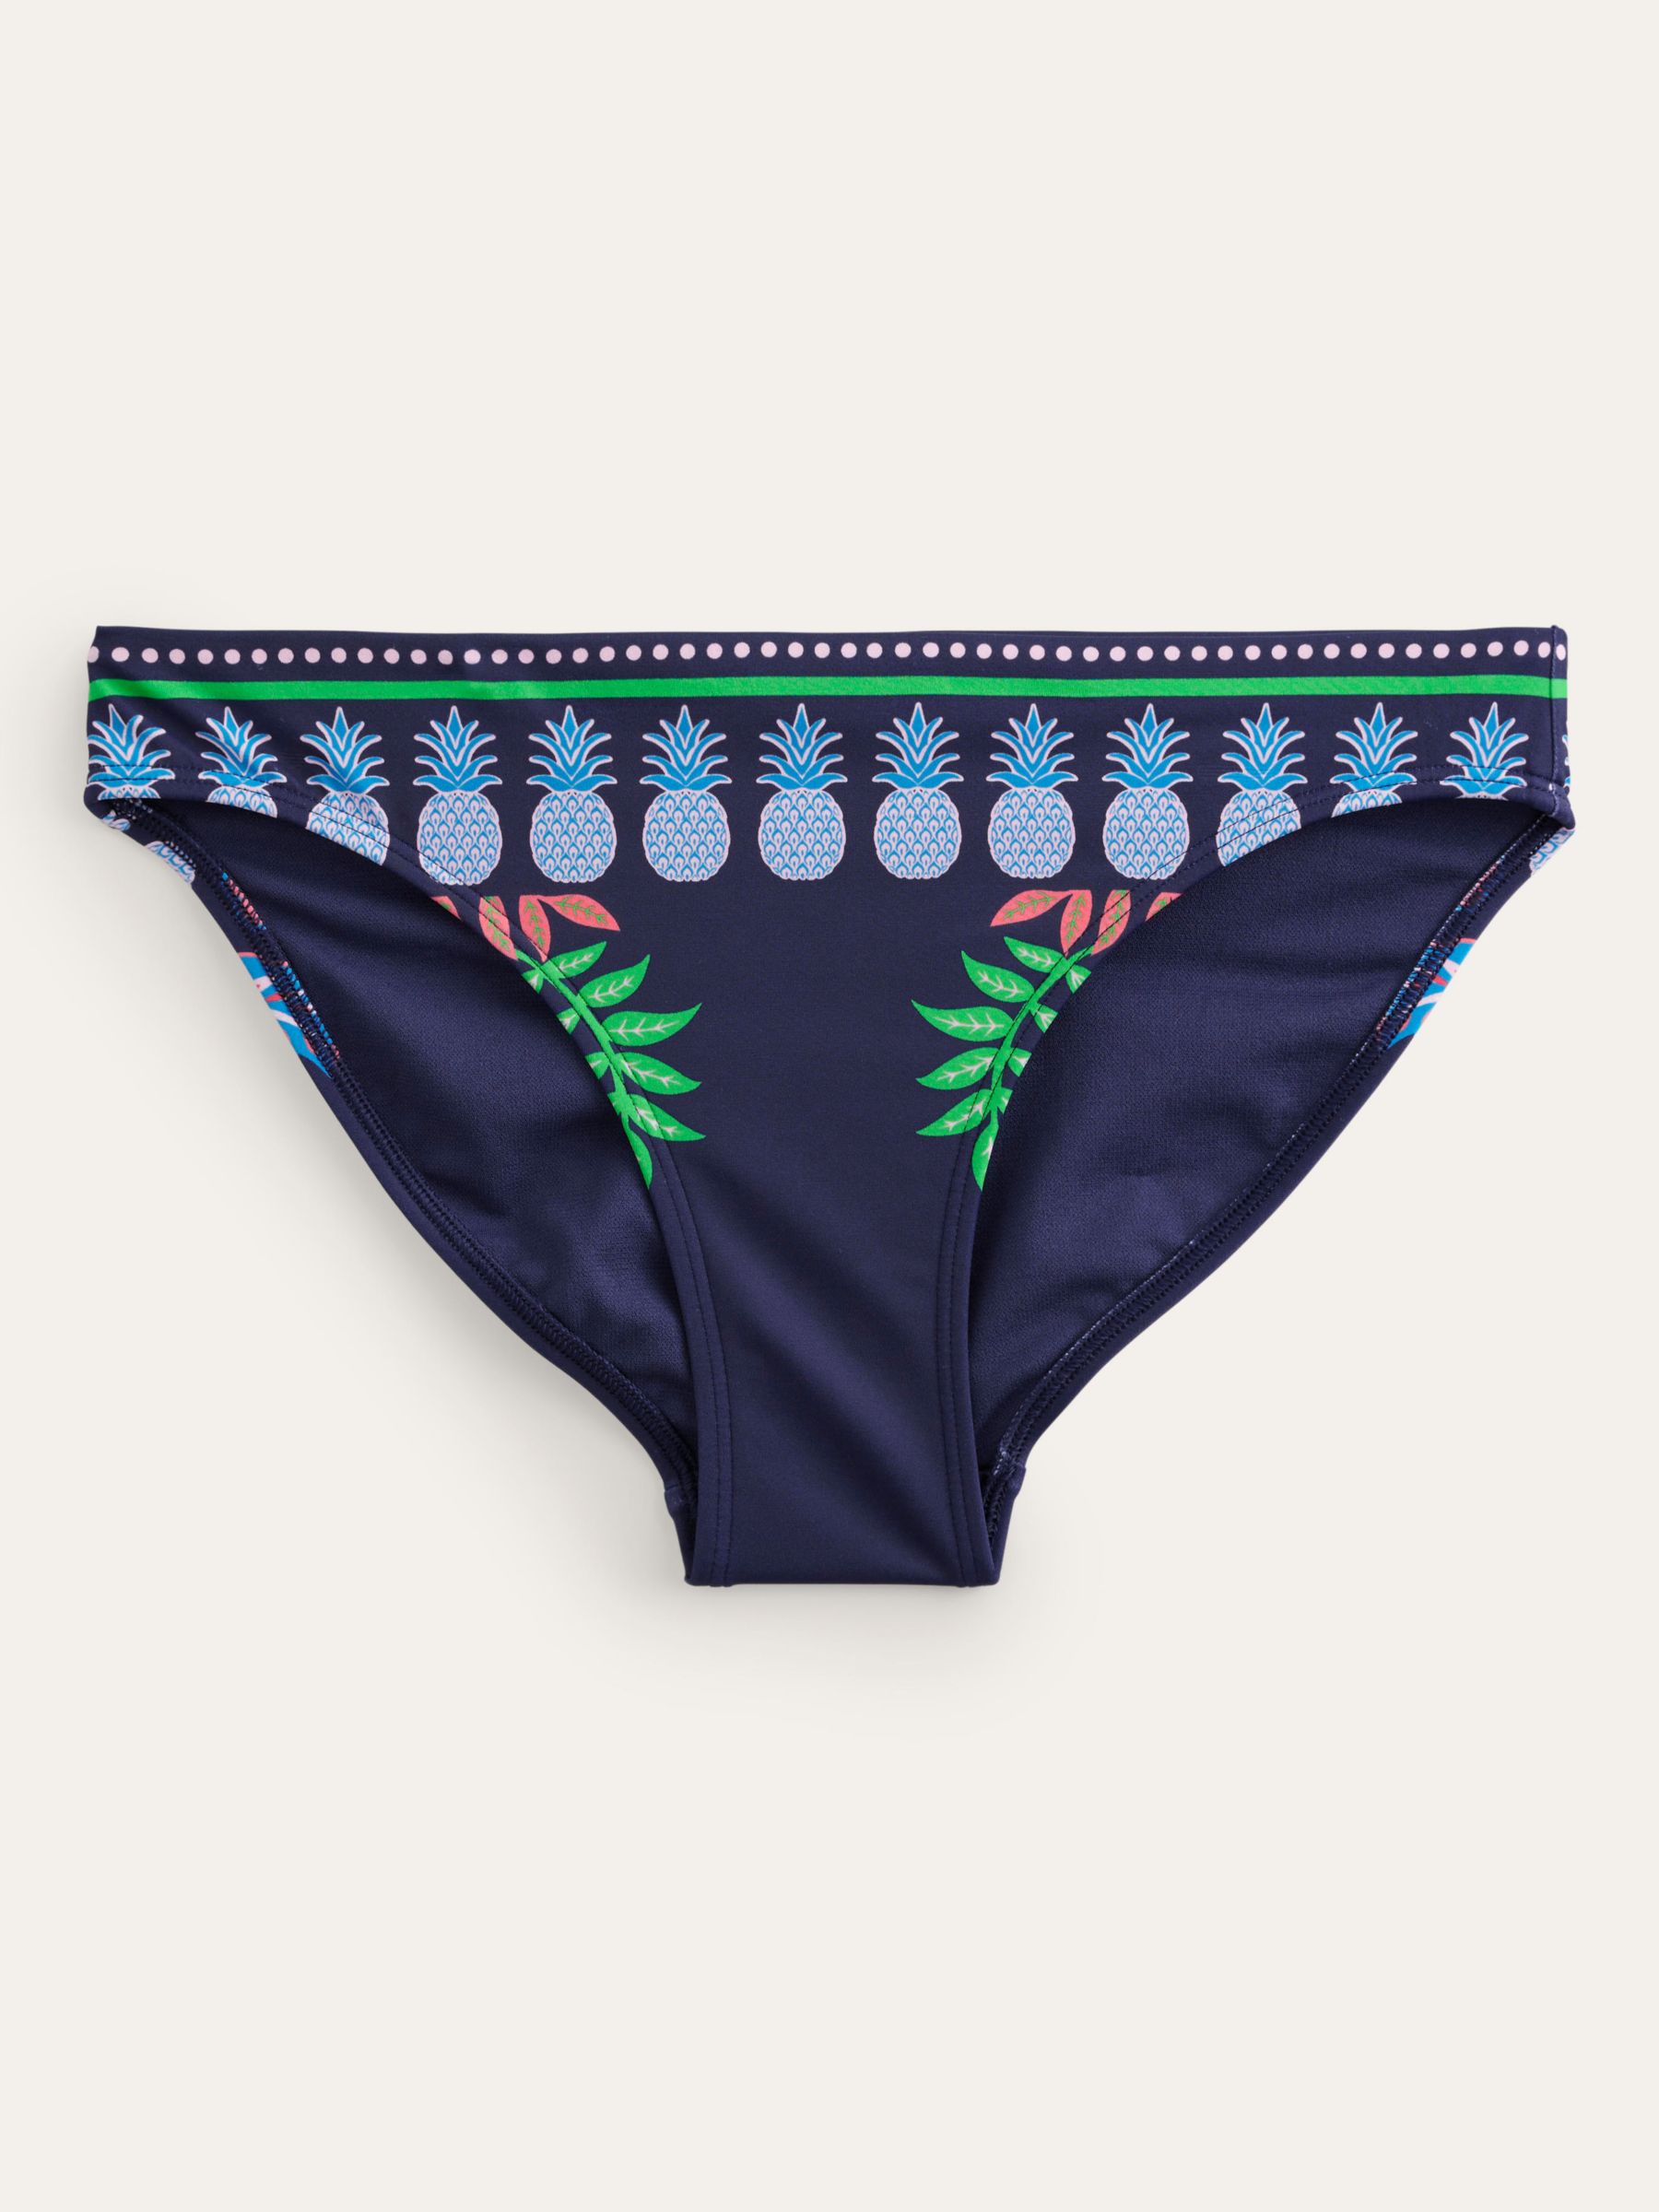 Buy Boden Classic Tropic Bikini Bottoms, French Navy Online at johnlewis.com